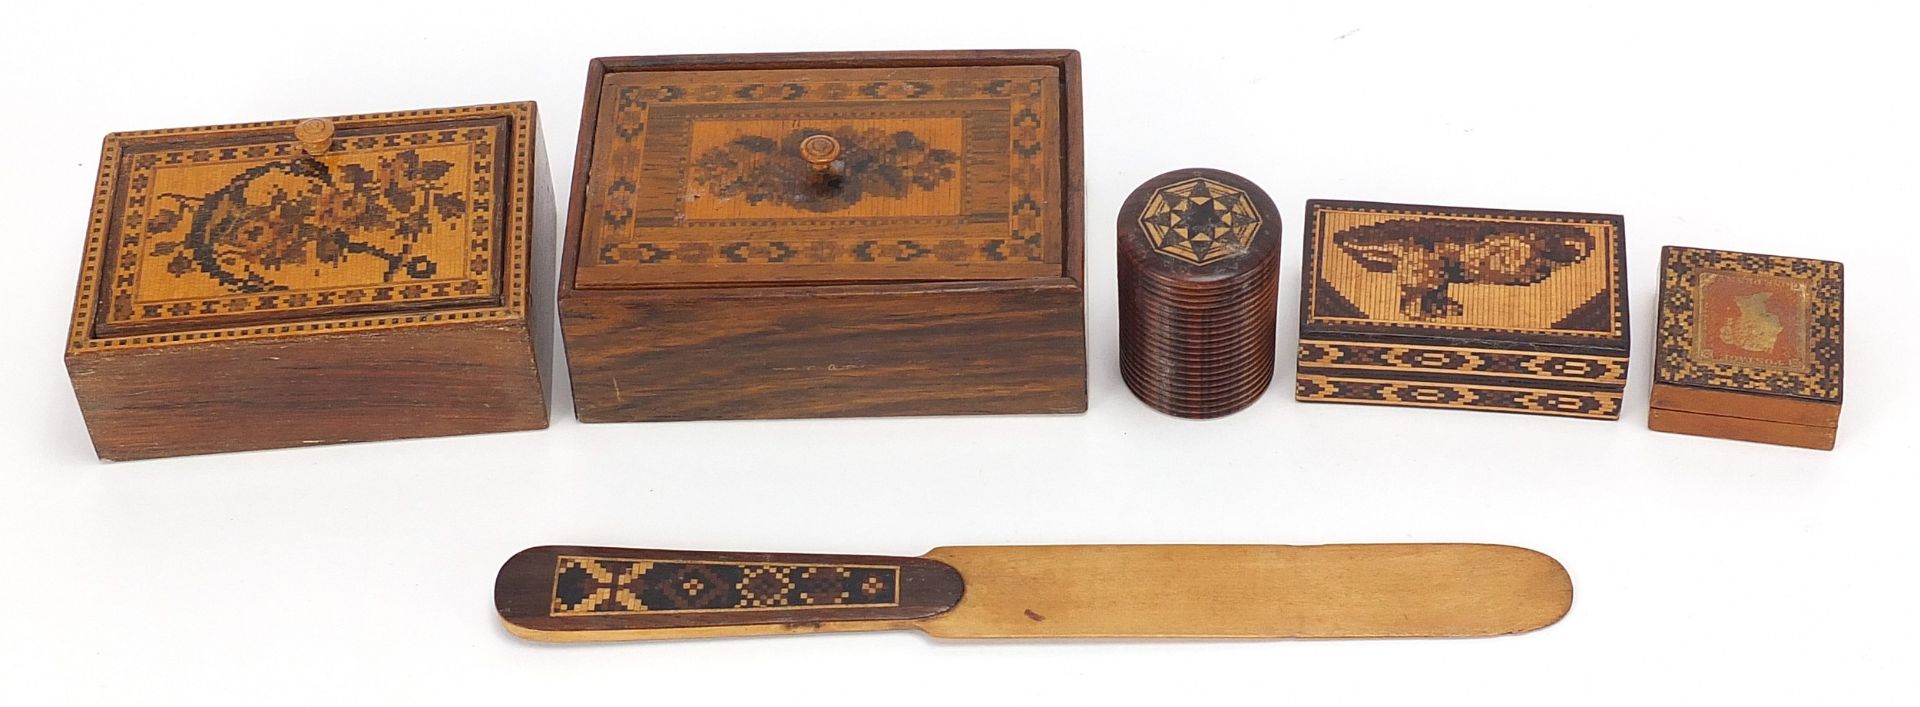 Victorian Tunbridge ware including a rosewood box inlaid with a dog, stamp box with penny red and - Image 2 of 3